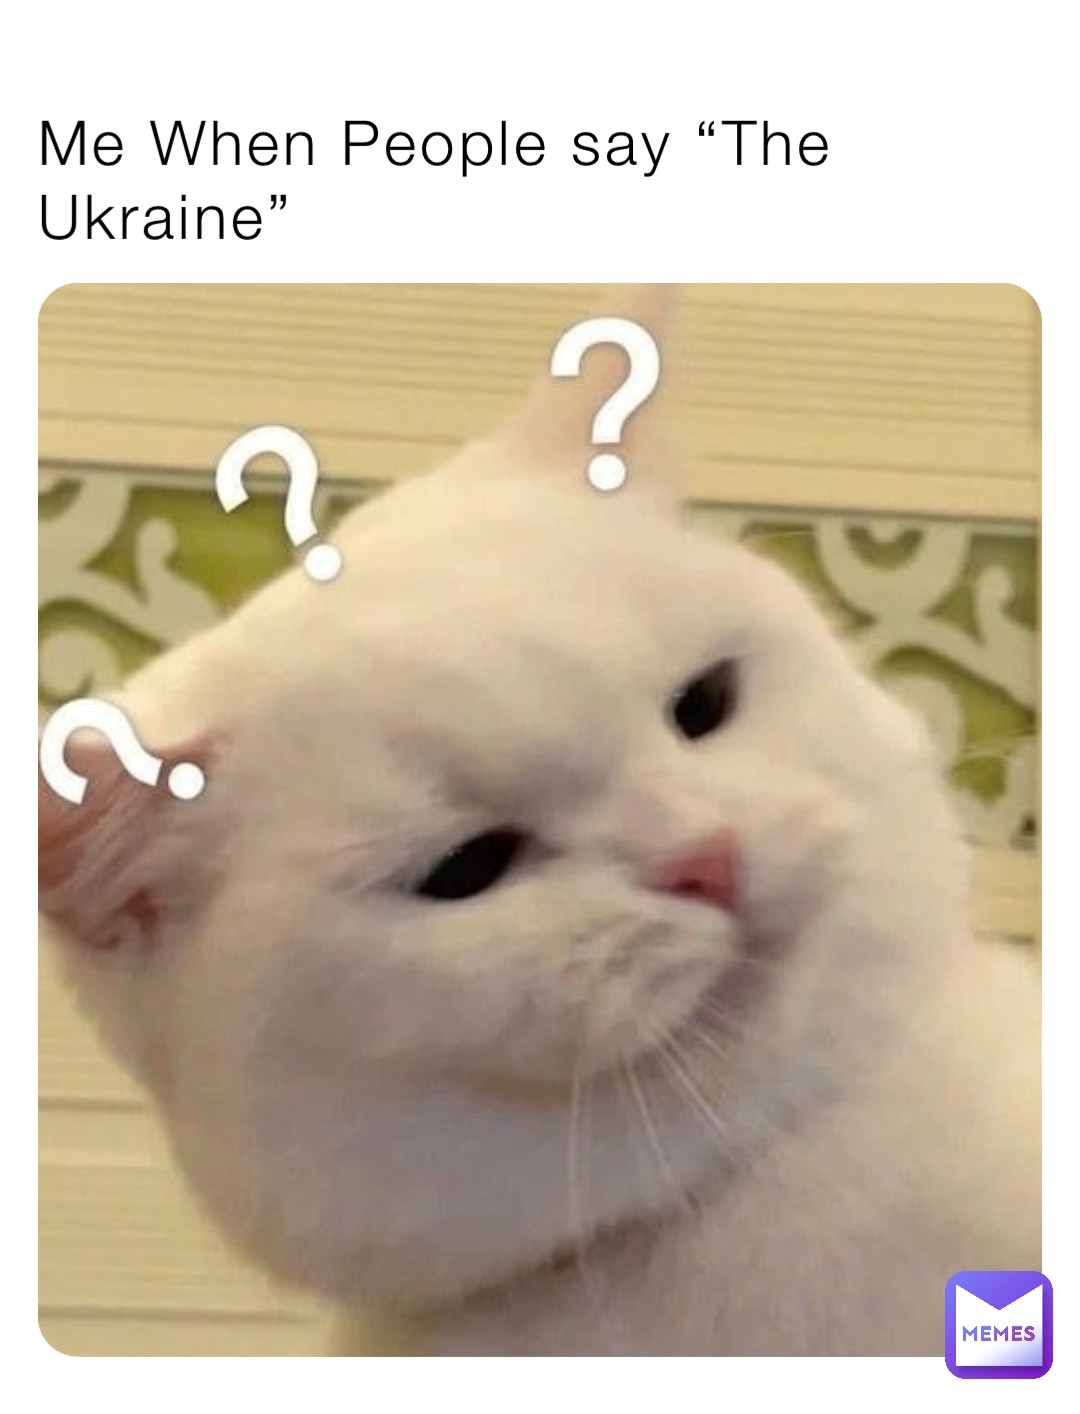 Me When People say “The Ukraine”